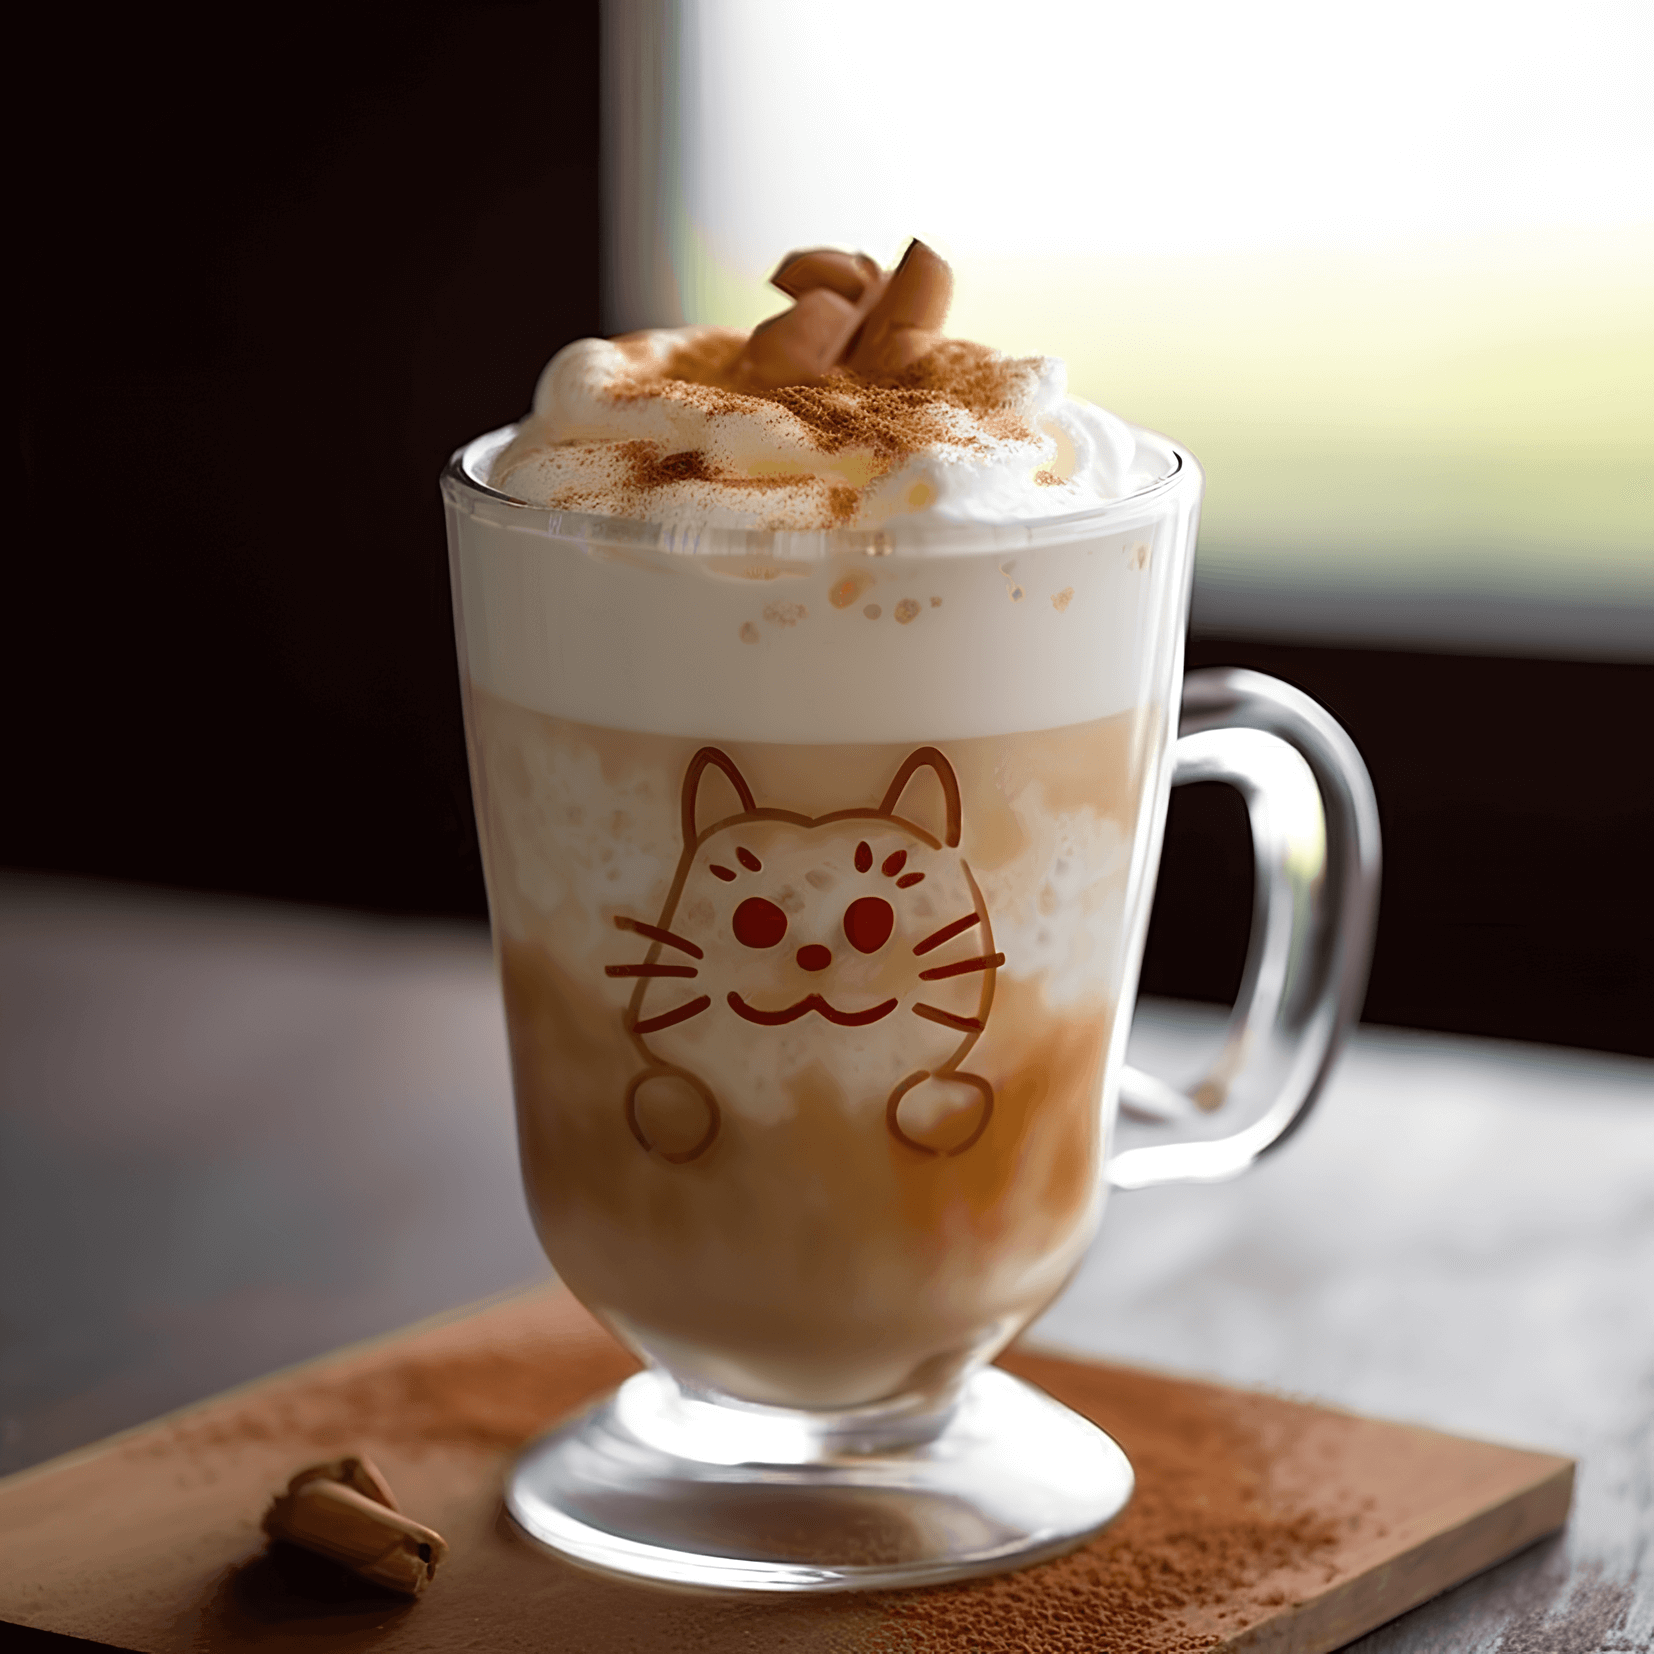 The Tom and Jerry cocktail has a rich, creamy taste with a hint of sweetness. The combination of warm milk, sugar, and spices creates a comforting, velvety texture. The addition of rum and brandy gives the drink a warming, boozy kick.